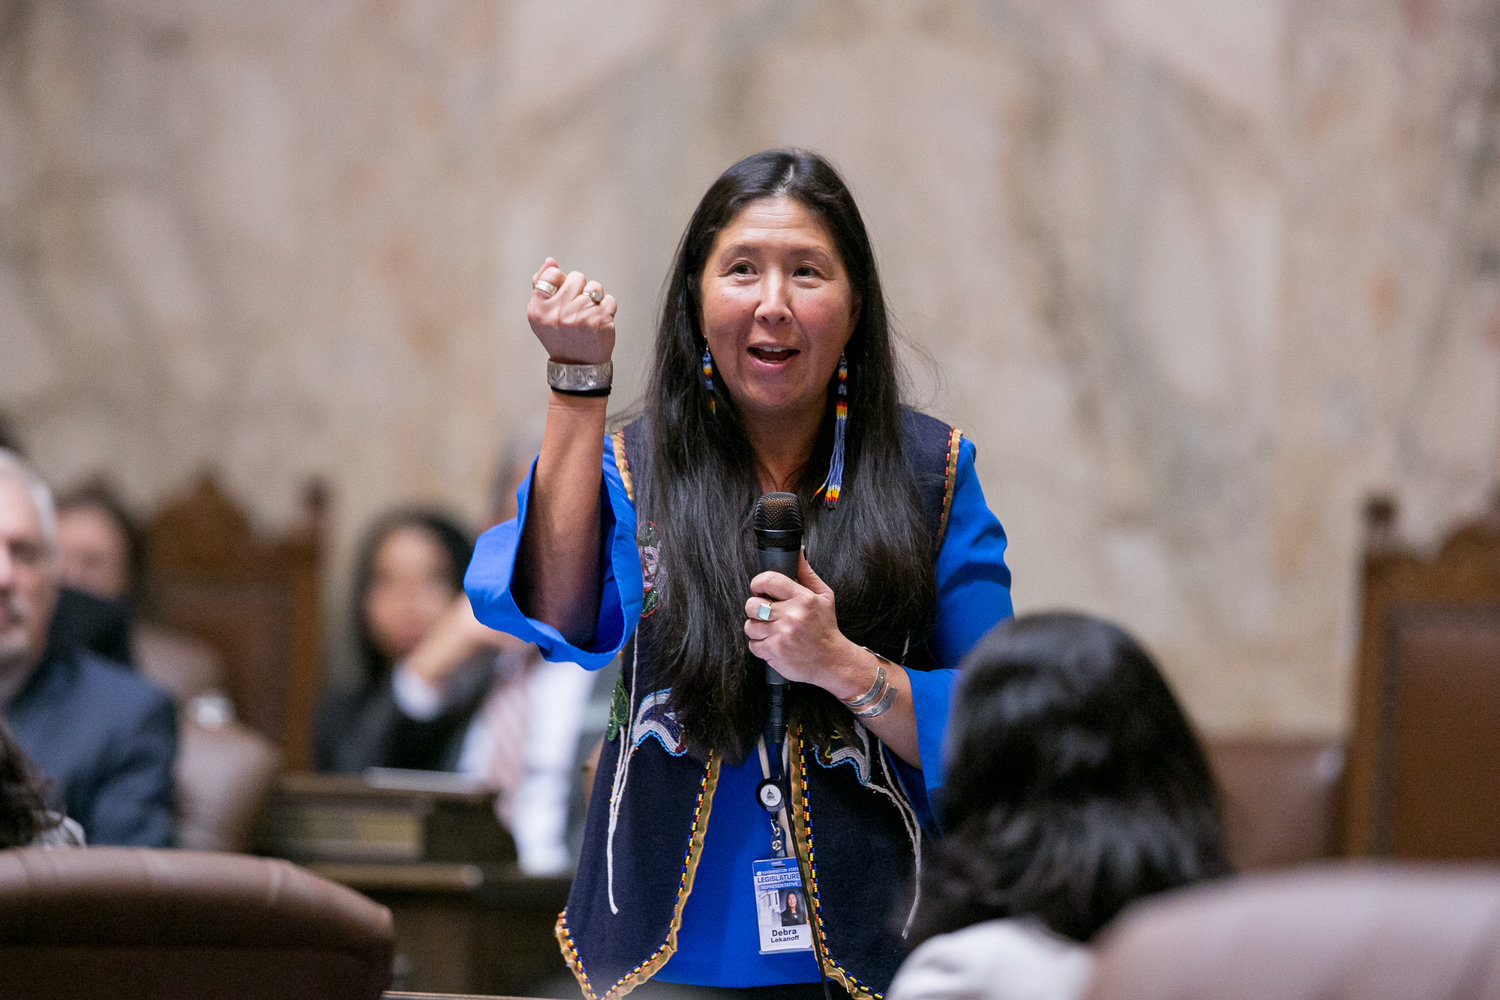 Caption: Debra Lekanoff is the only Native American in the Washington State Legislature, and she feels the weight of clearing the way for others to follow.